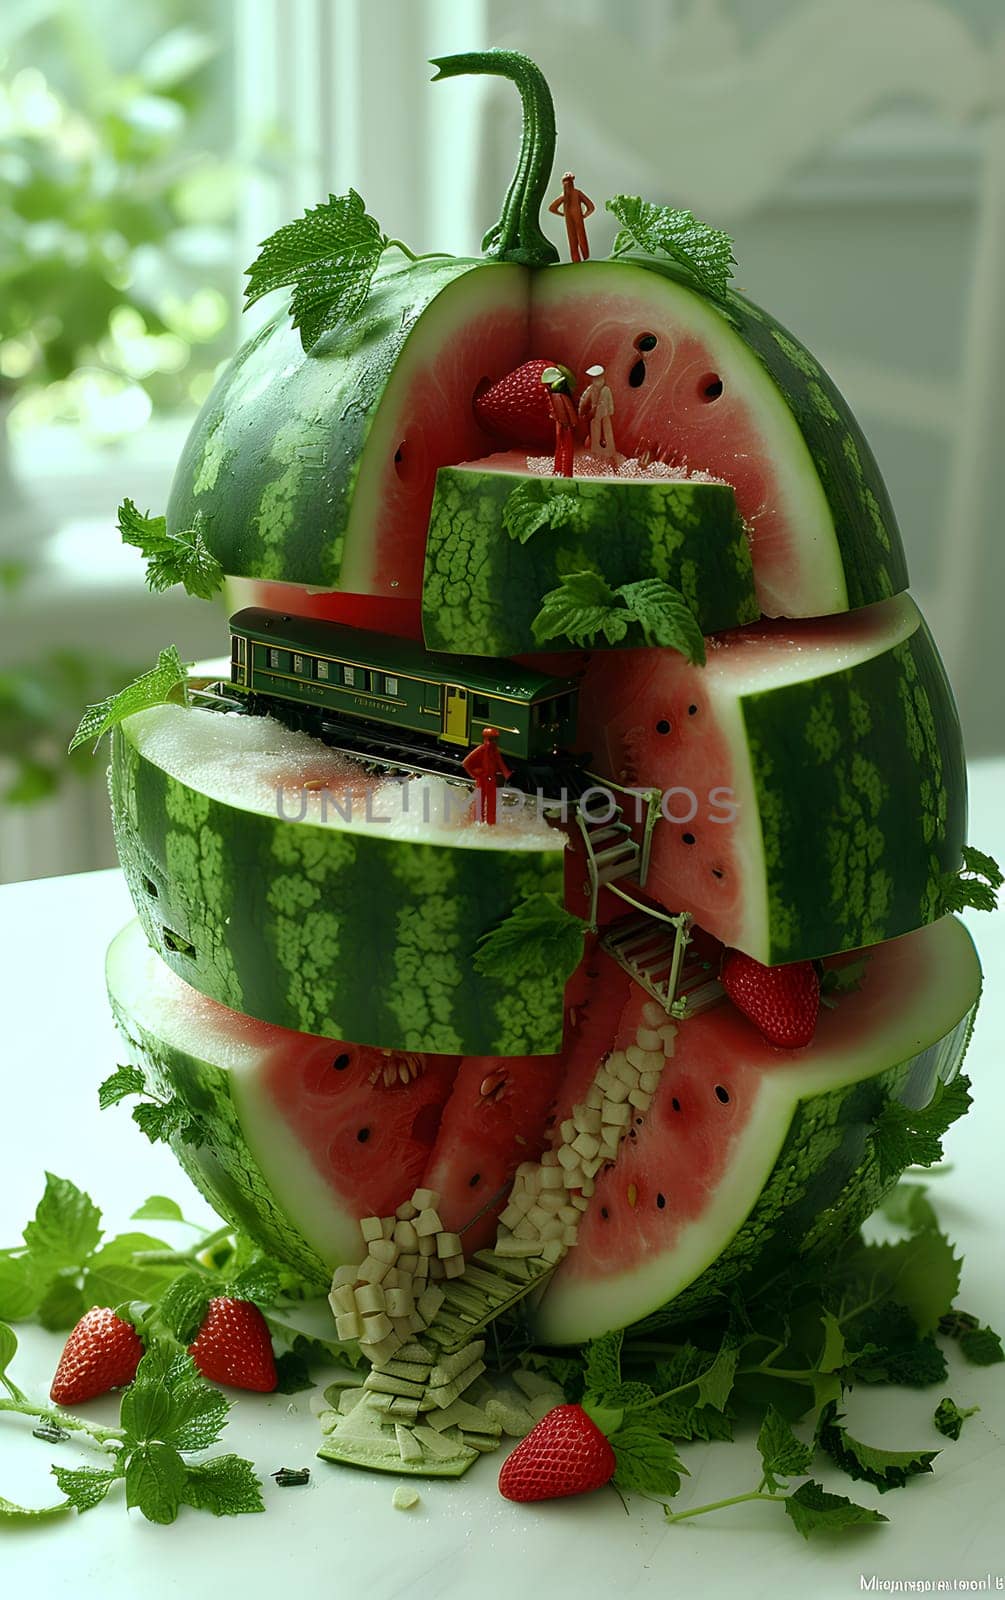 Watermelon carved with train design, a fun food art creation by Nadtochiy